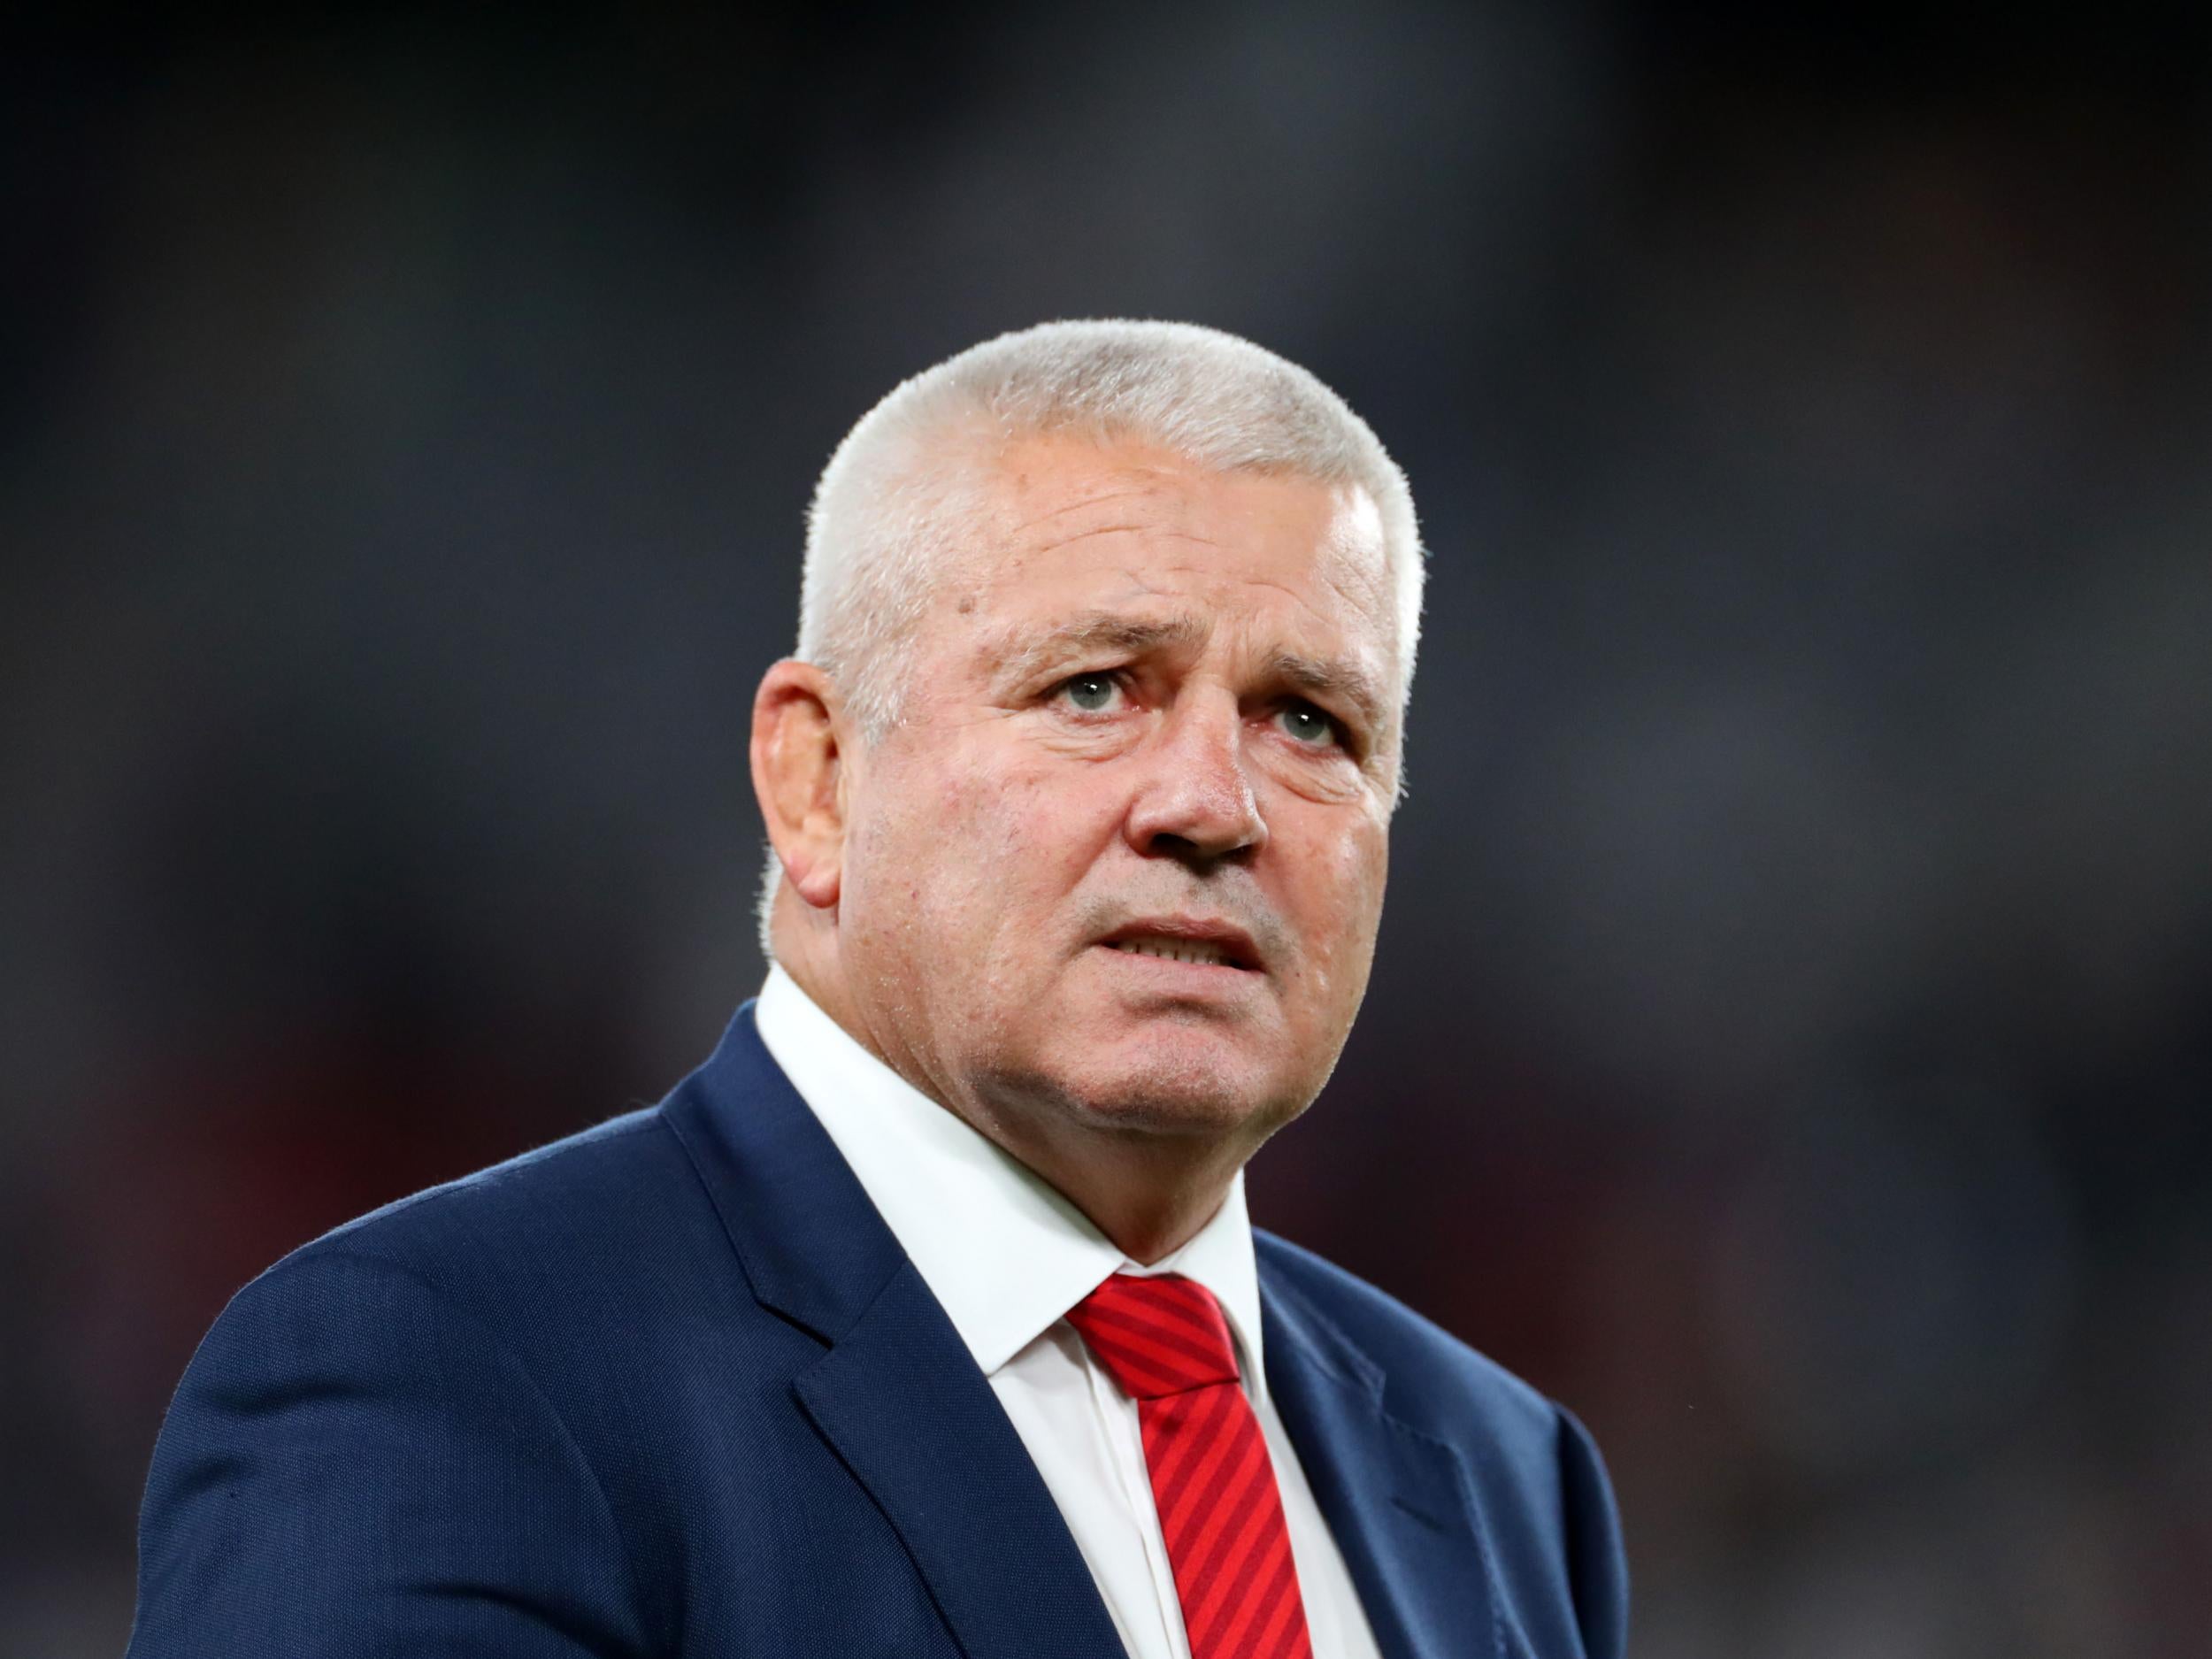 Warren Gatland leaves Wales after 12 years in charge of the national team